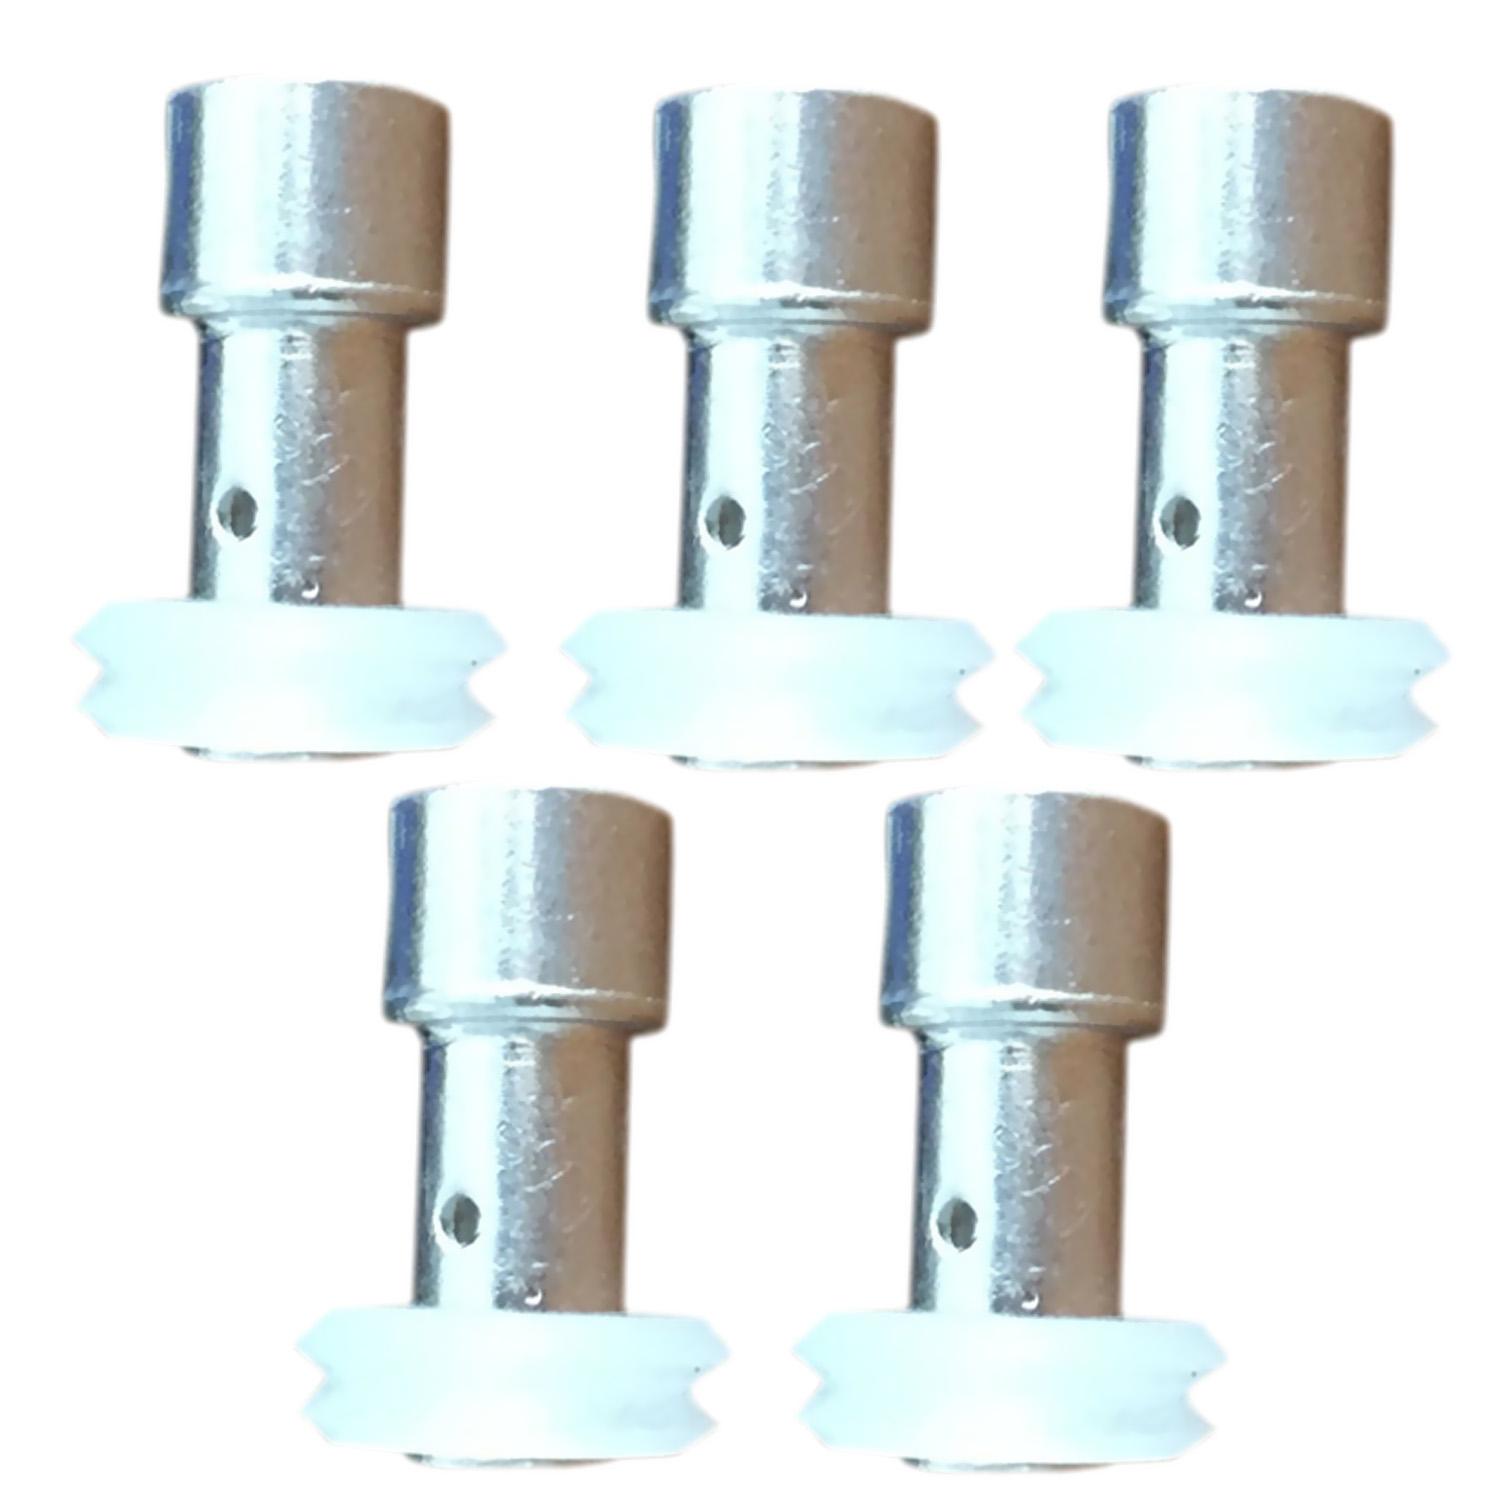 5 Pack Universal Replacement Floater And Sealer Parts for Pressure Cookers